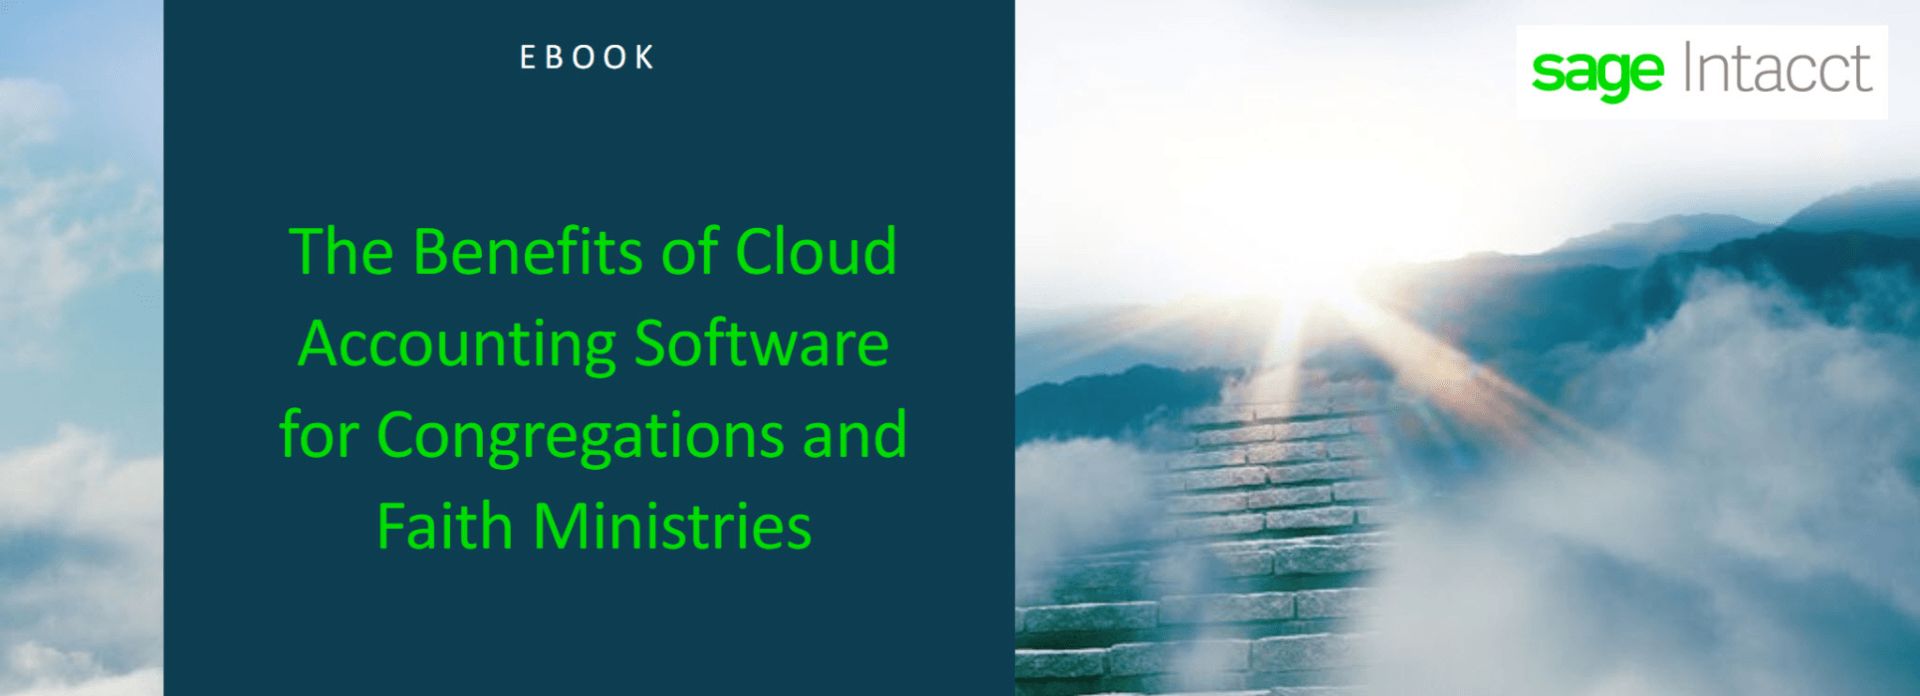 Benefits of cloud accounting for Congregations